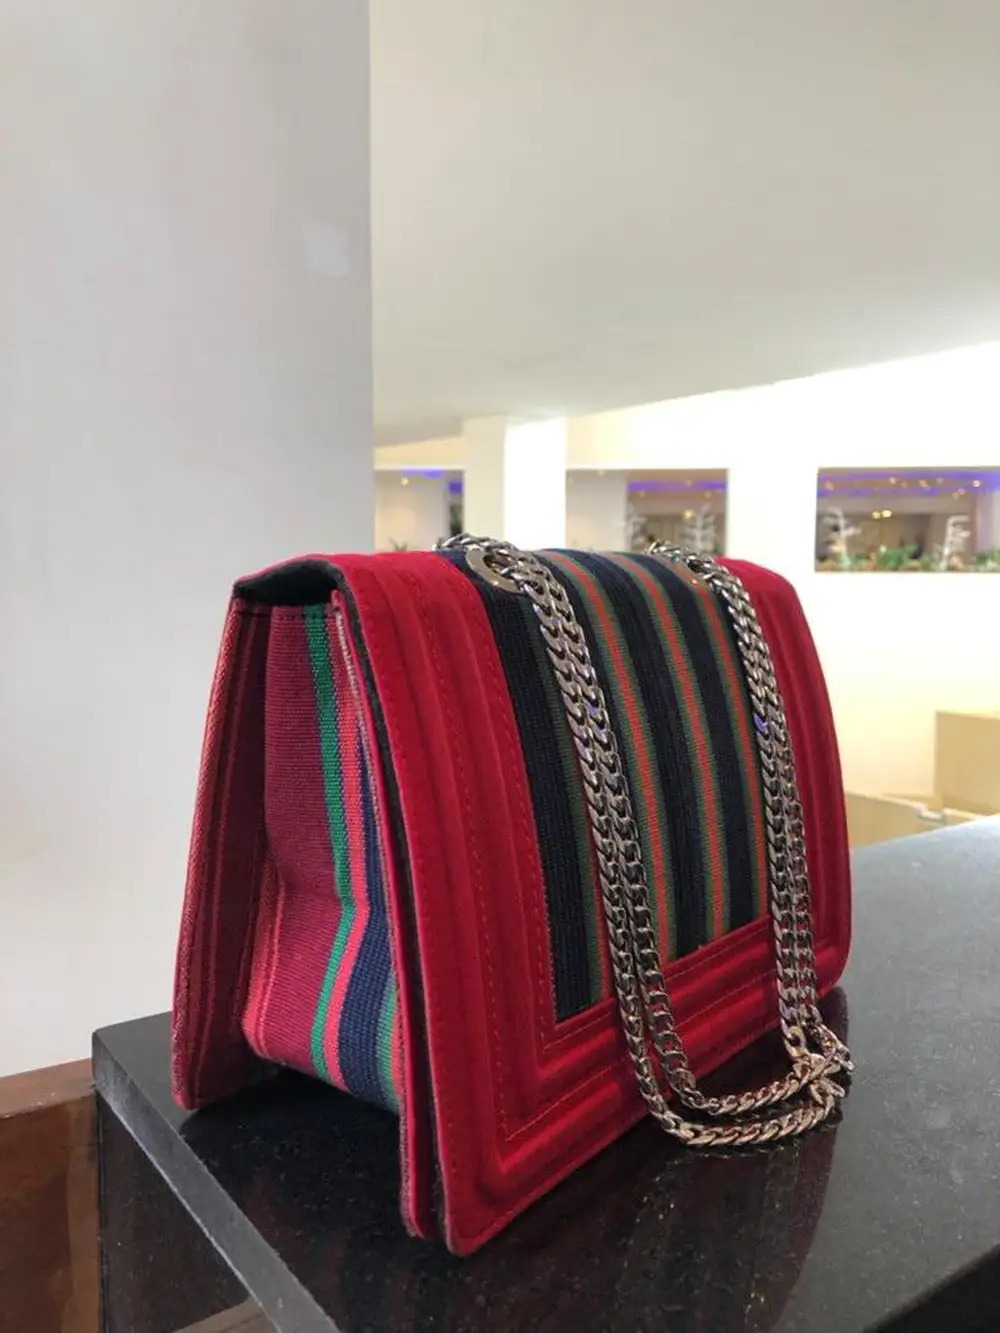 Side view of the Aso-oke bag